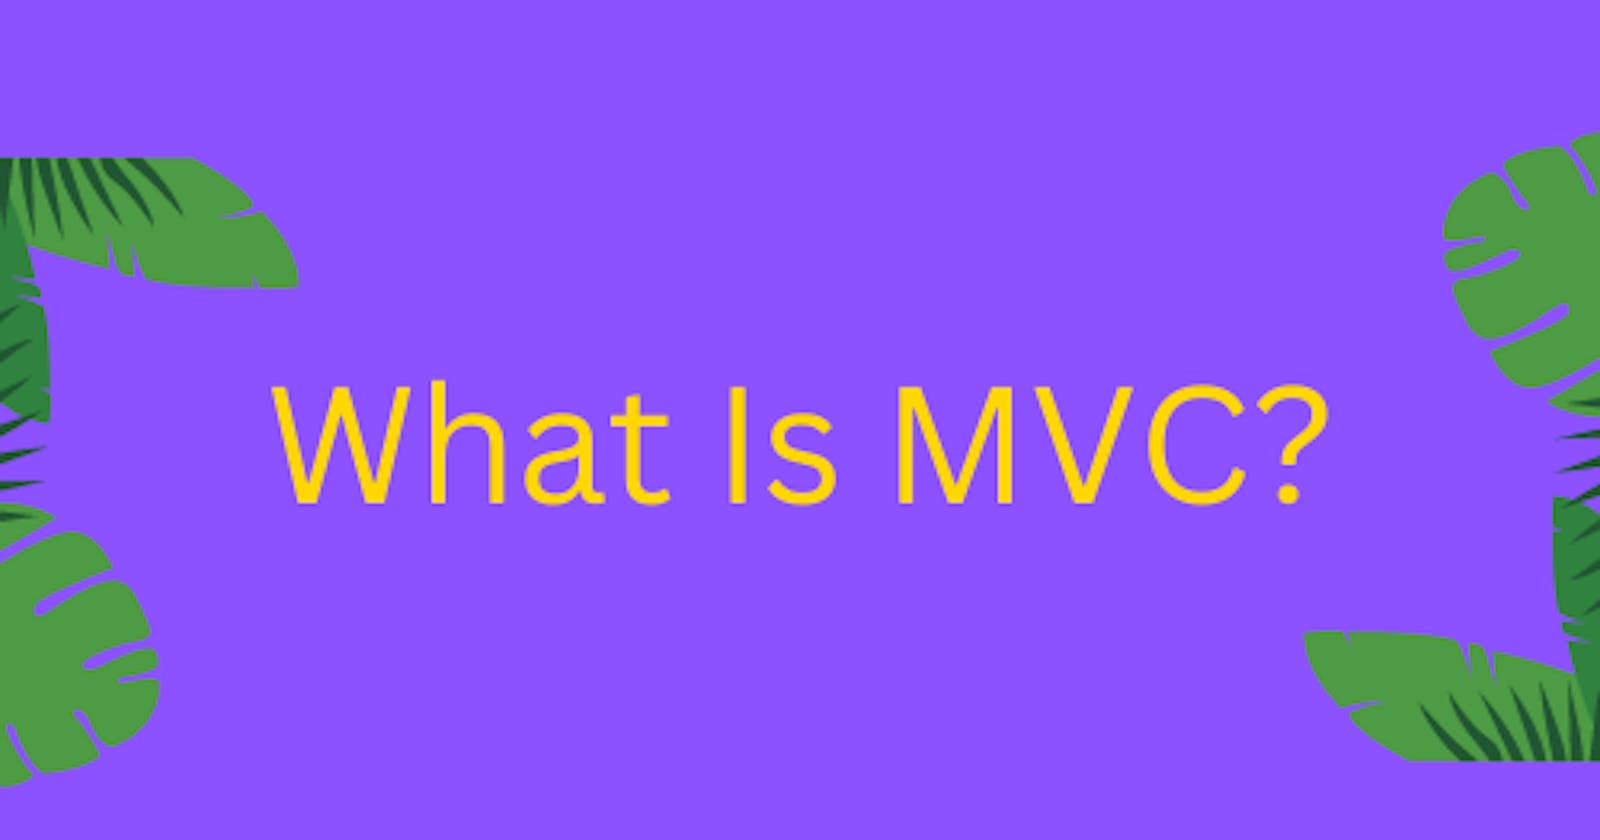 What's all the talk about MVC?